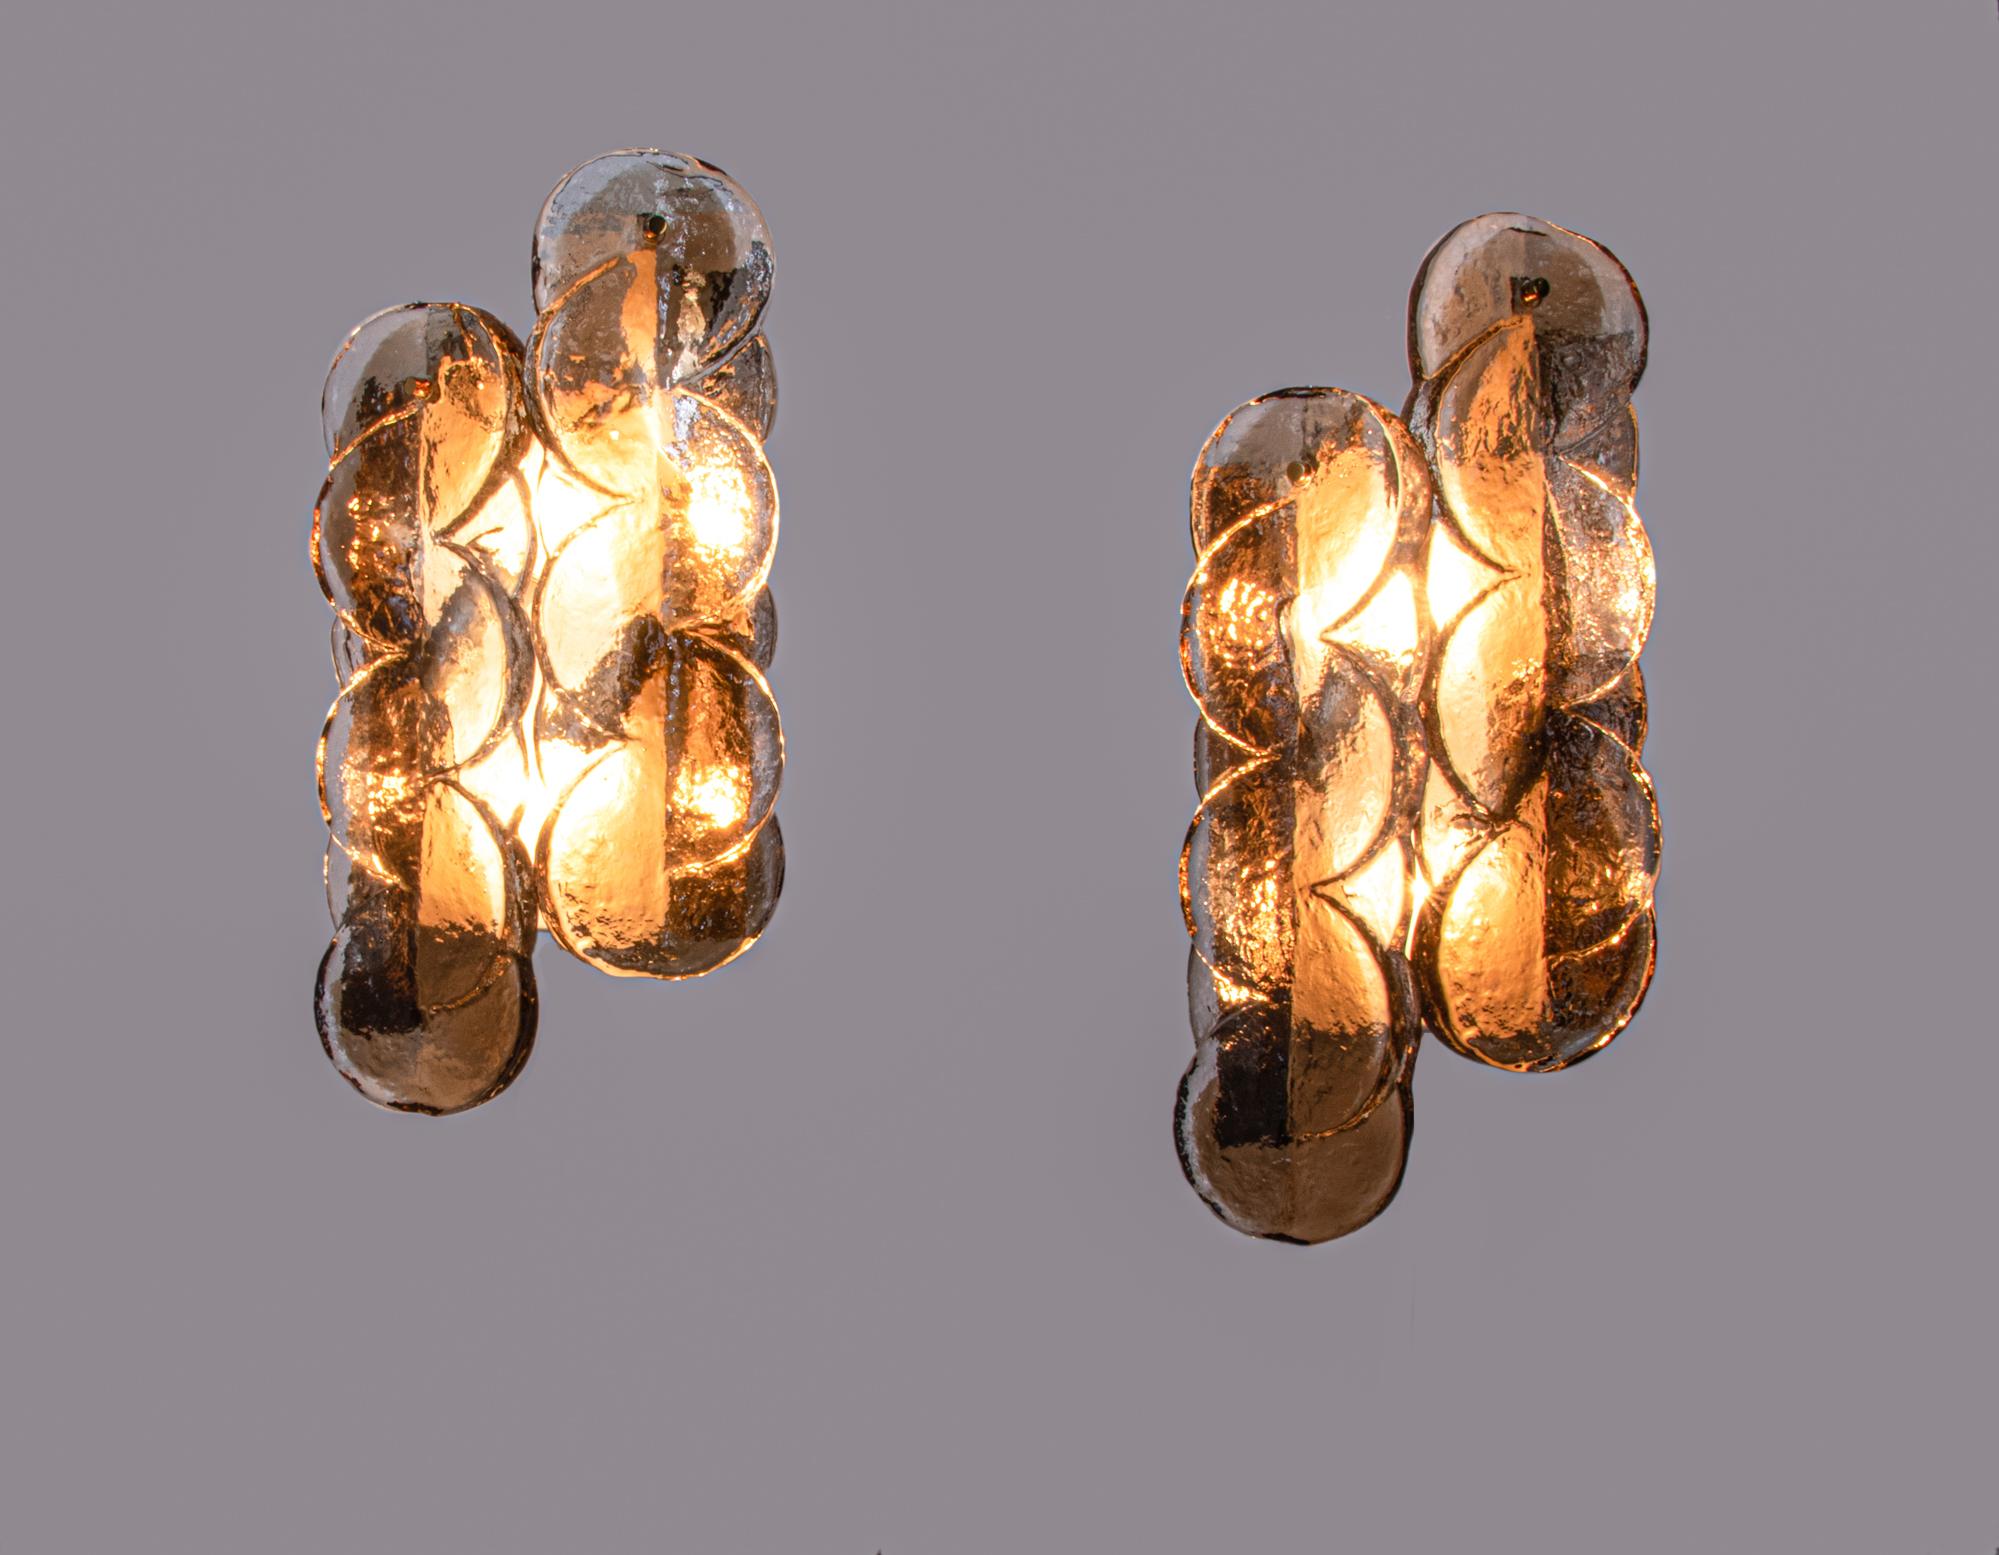 Elegant set of two amber-colored 'Citrus' wall lights with two swirled glasses per light on a metal frame with brass and chrome applications. The heavy handblown amber and clear Murano glasses have smoke-colored accents. Manufactured by Kalmar,